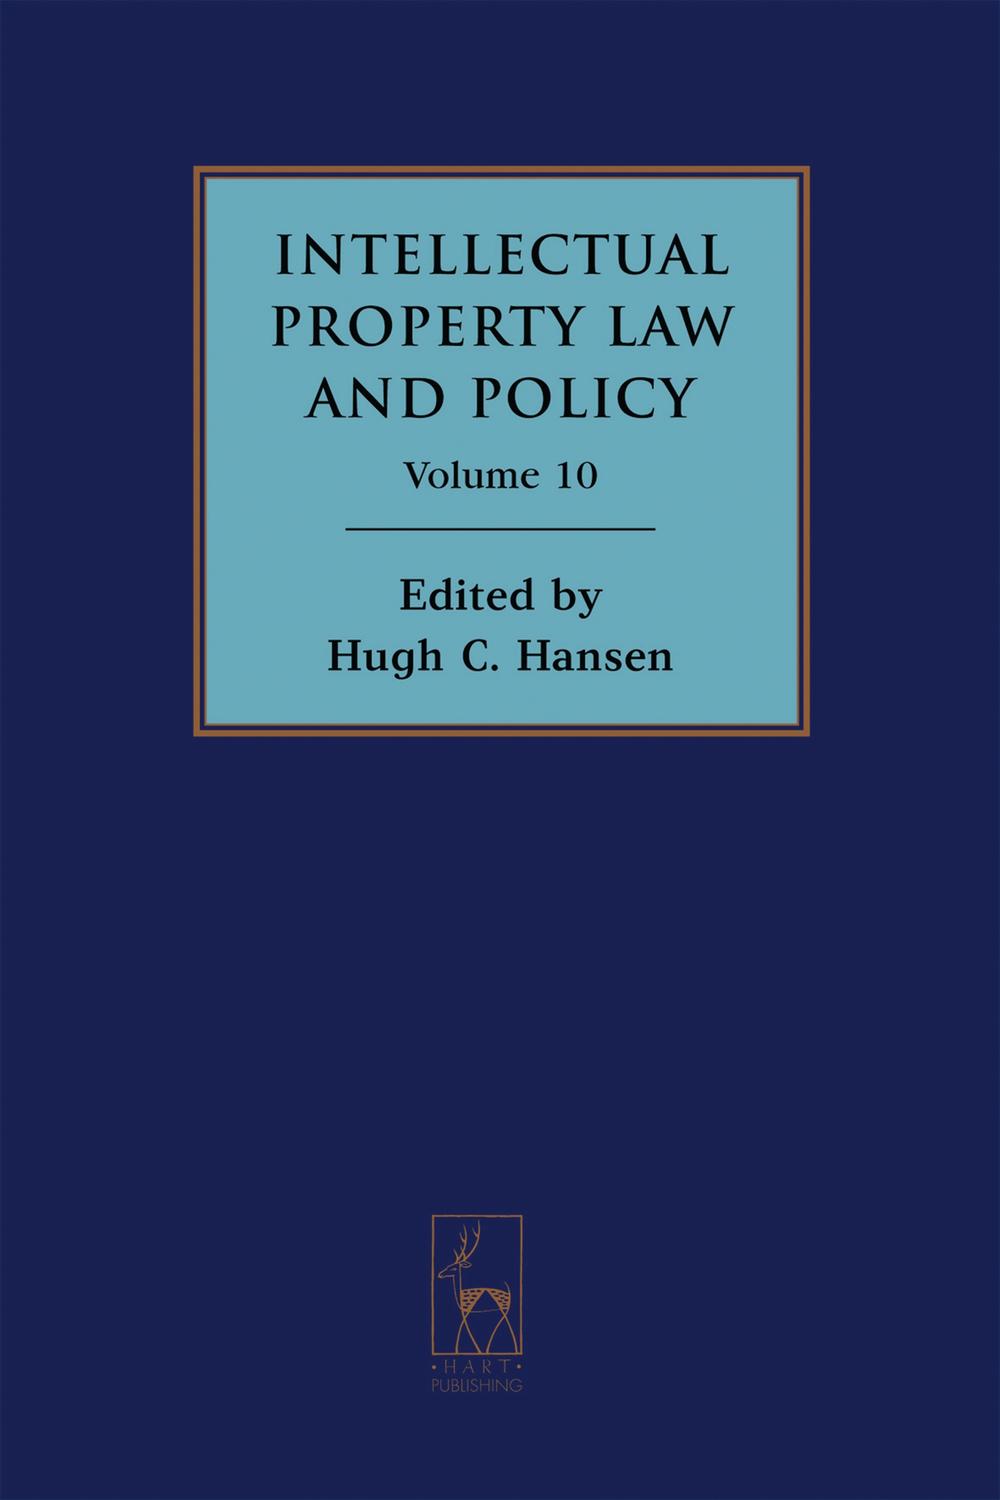 Intellectual Property Law and Policy Volume 10 - Hugh Hansen